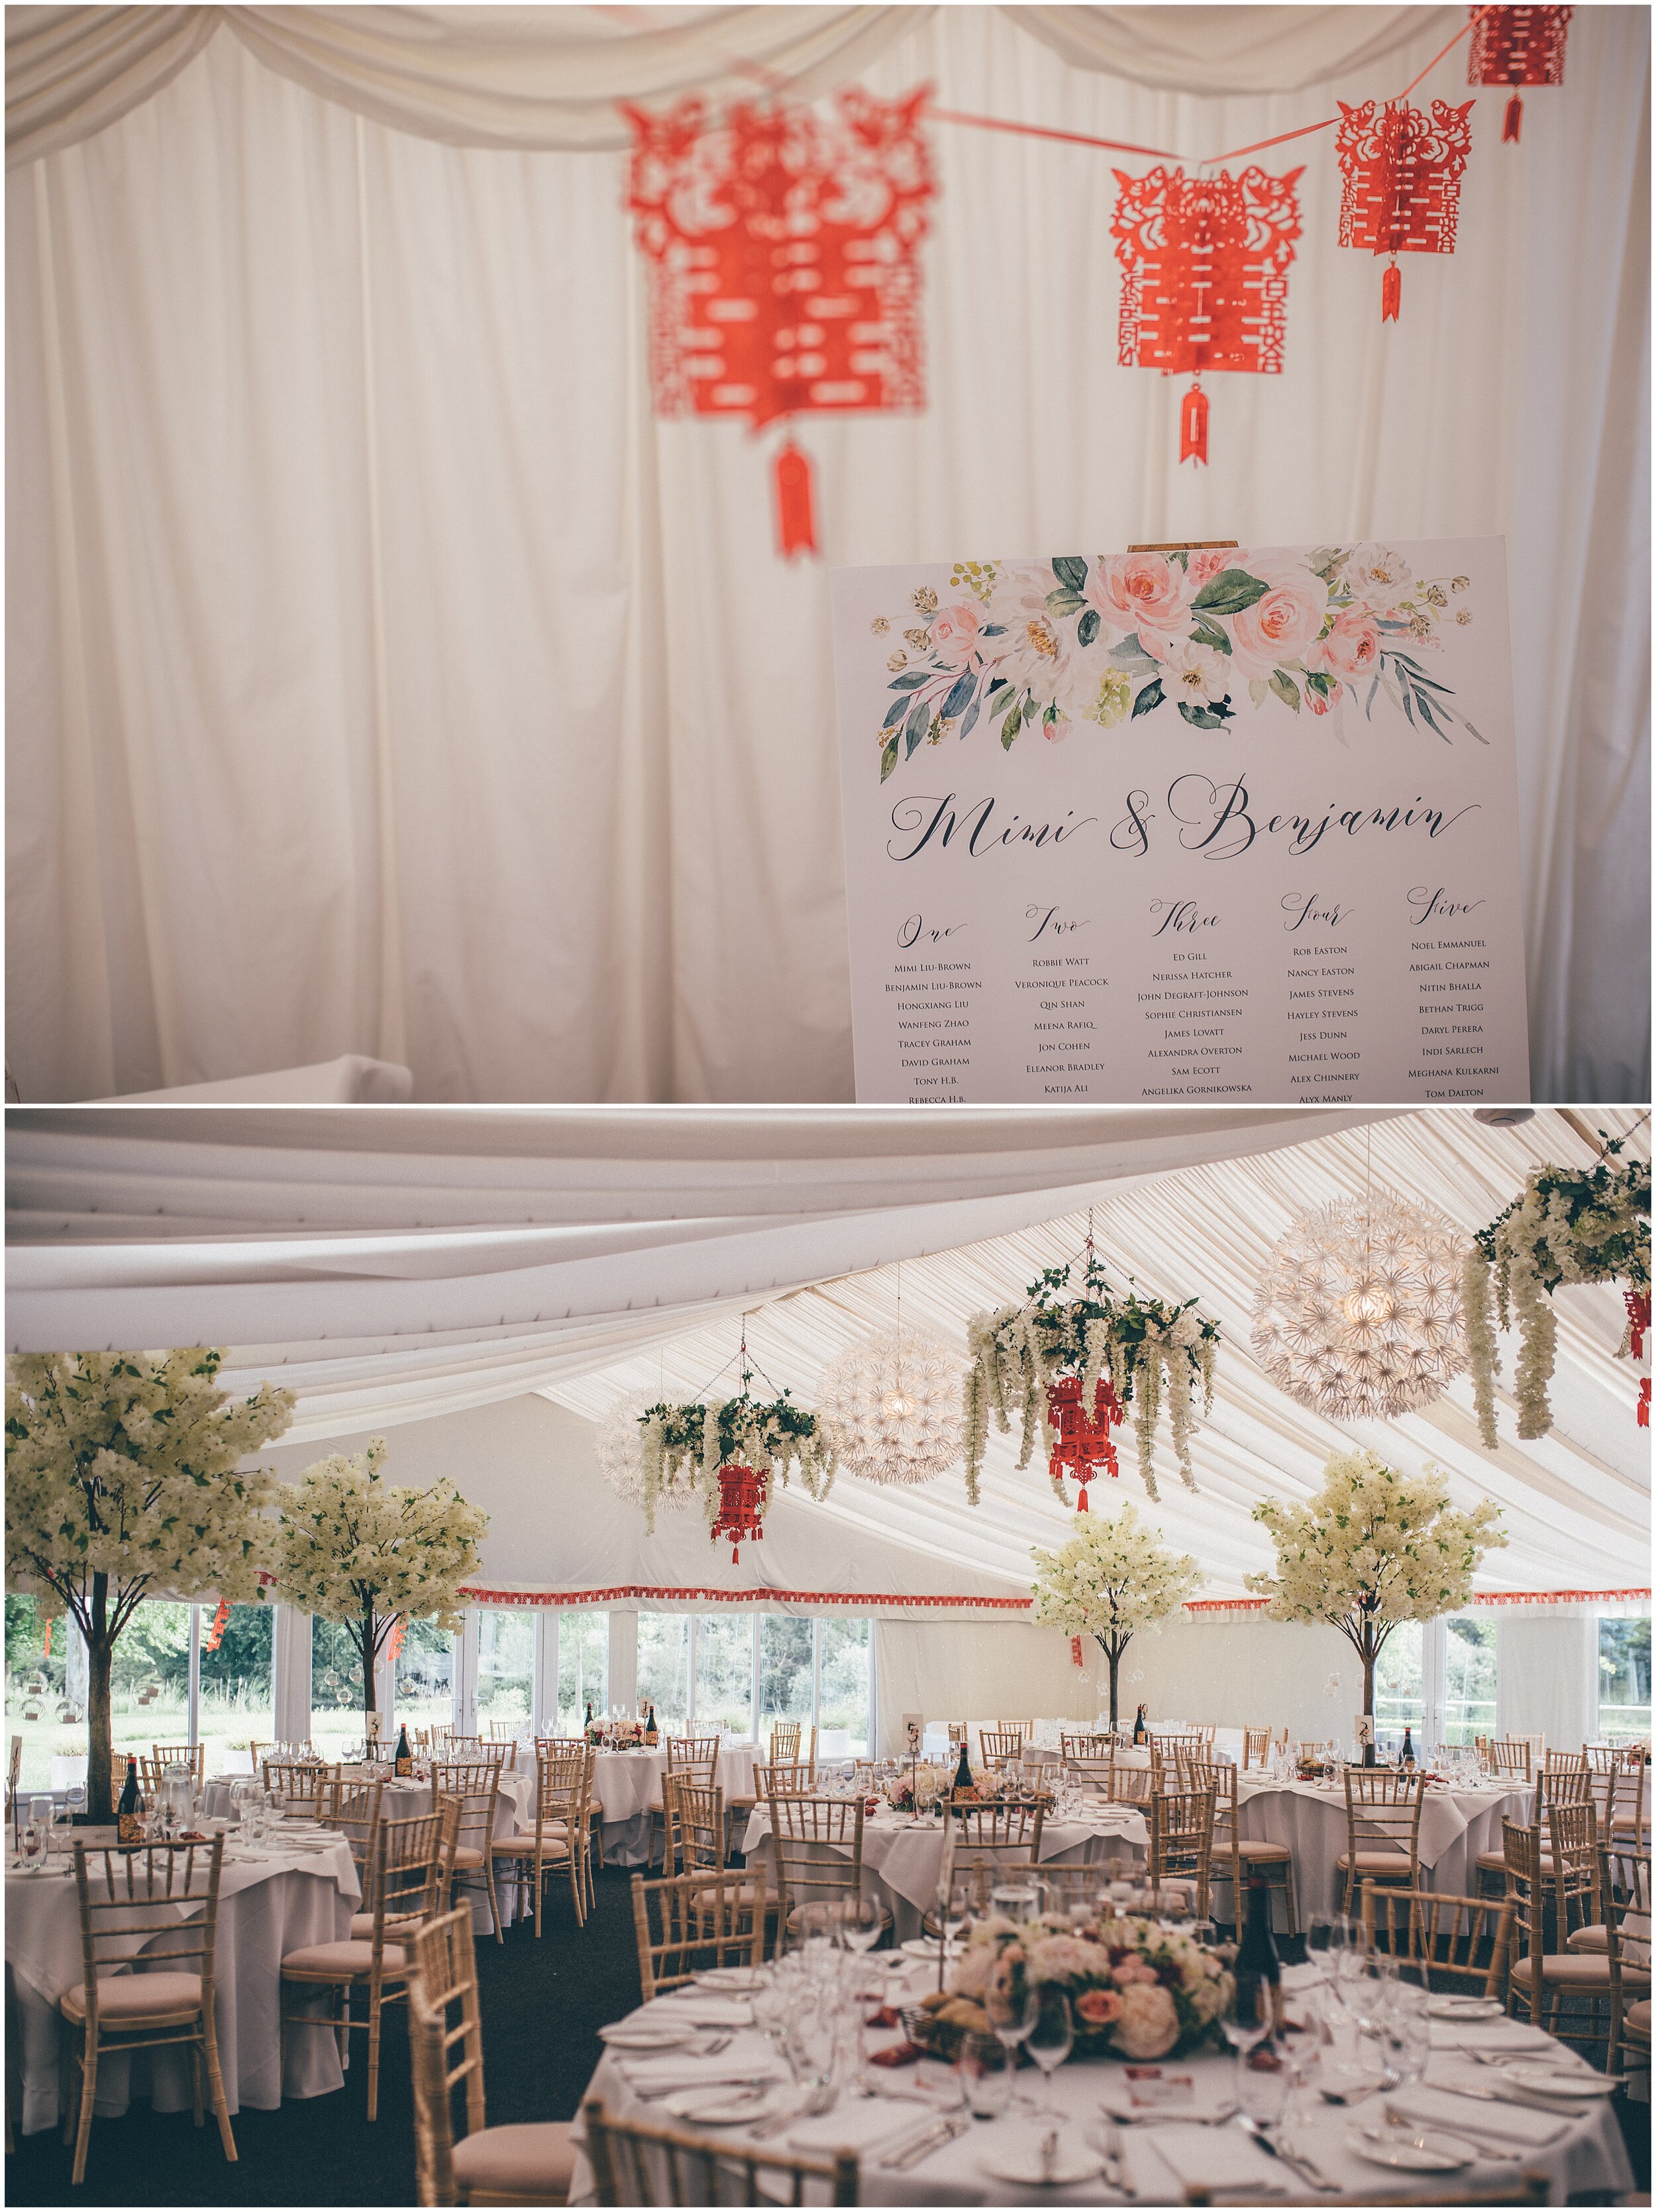 Chinese themed wedding decorations and table settings.